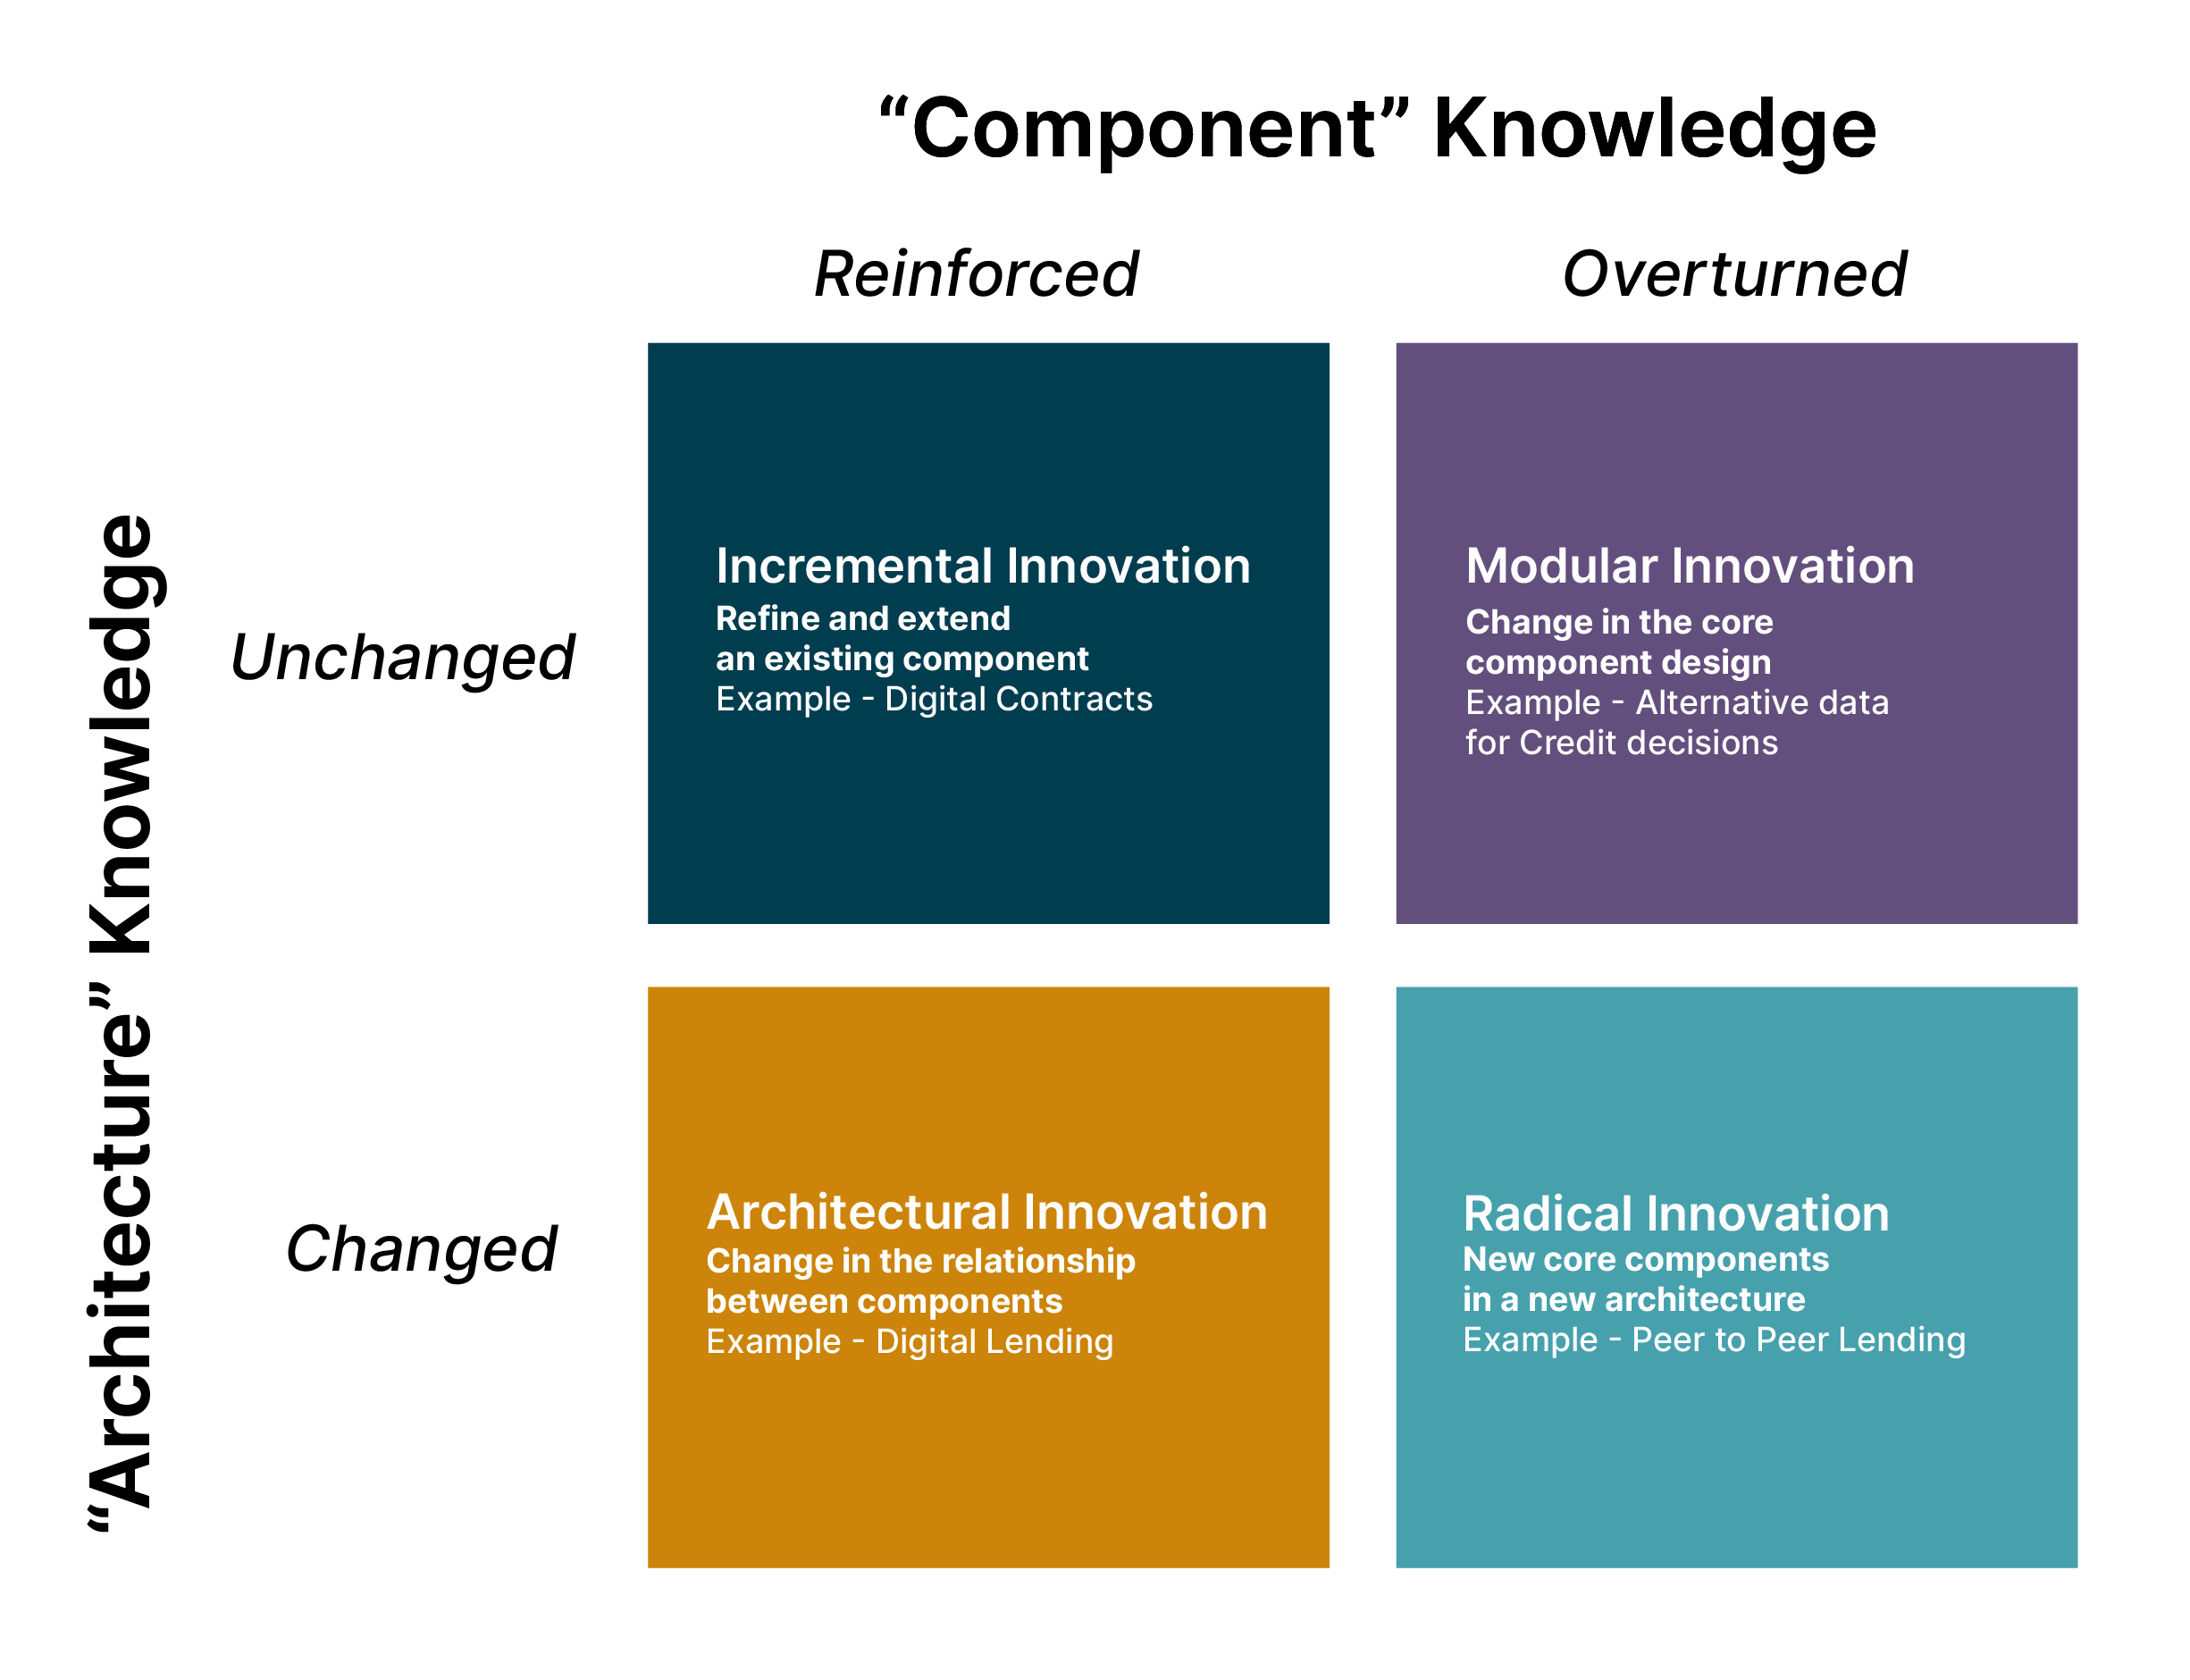 This diagram illustrates explains the impact of any innovation on the existing architectural and component knowledge of the firm. 